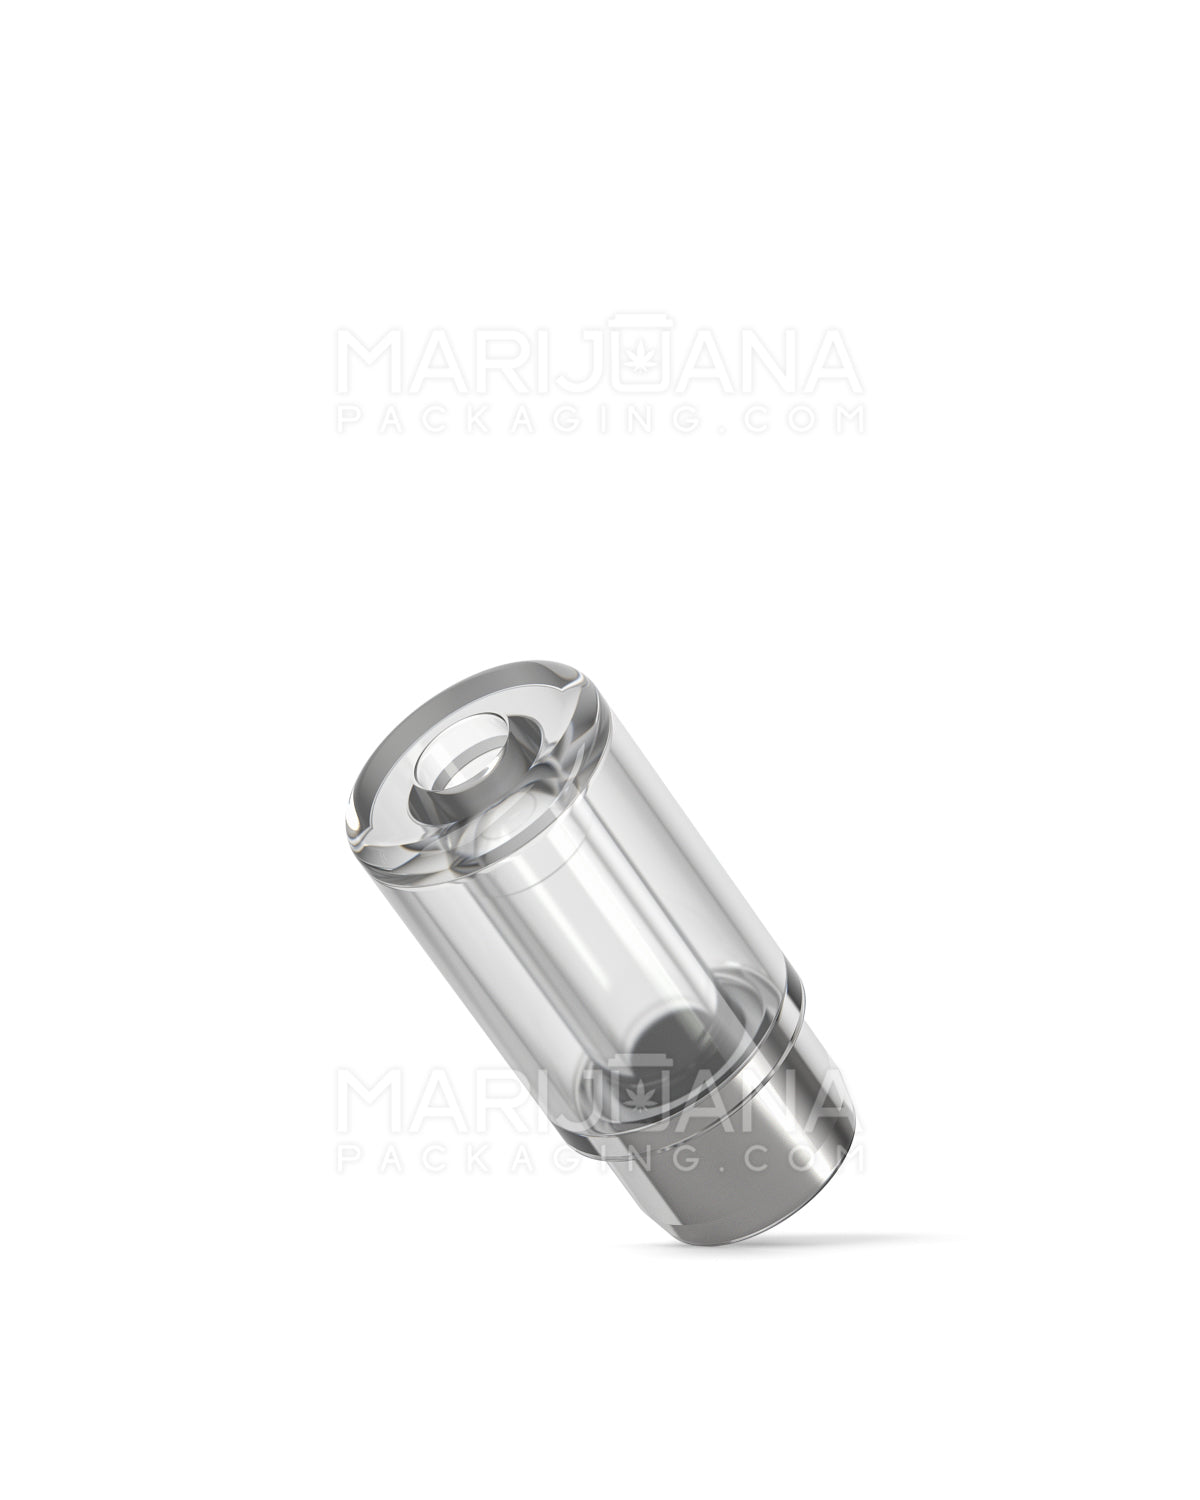 AVD | Round Vape Mouthpiece for Plastic Cartridges | Clear Plastic - Press On - 600 Count - 4